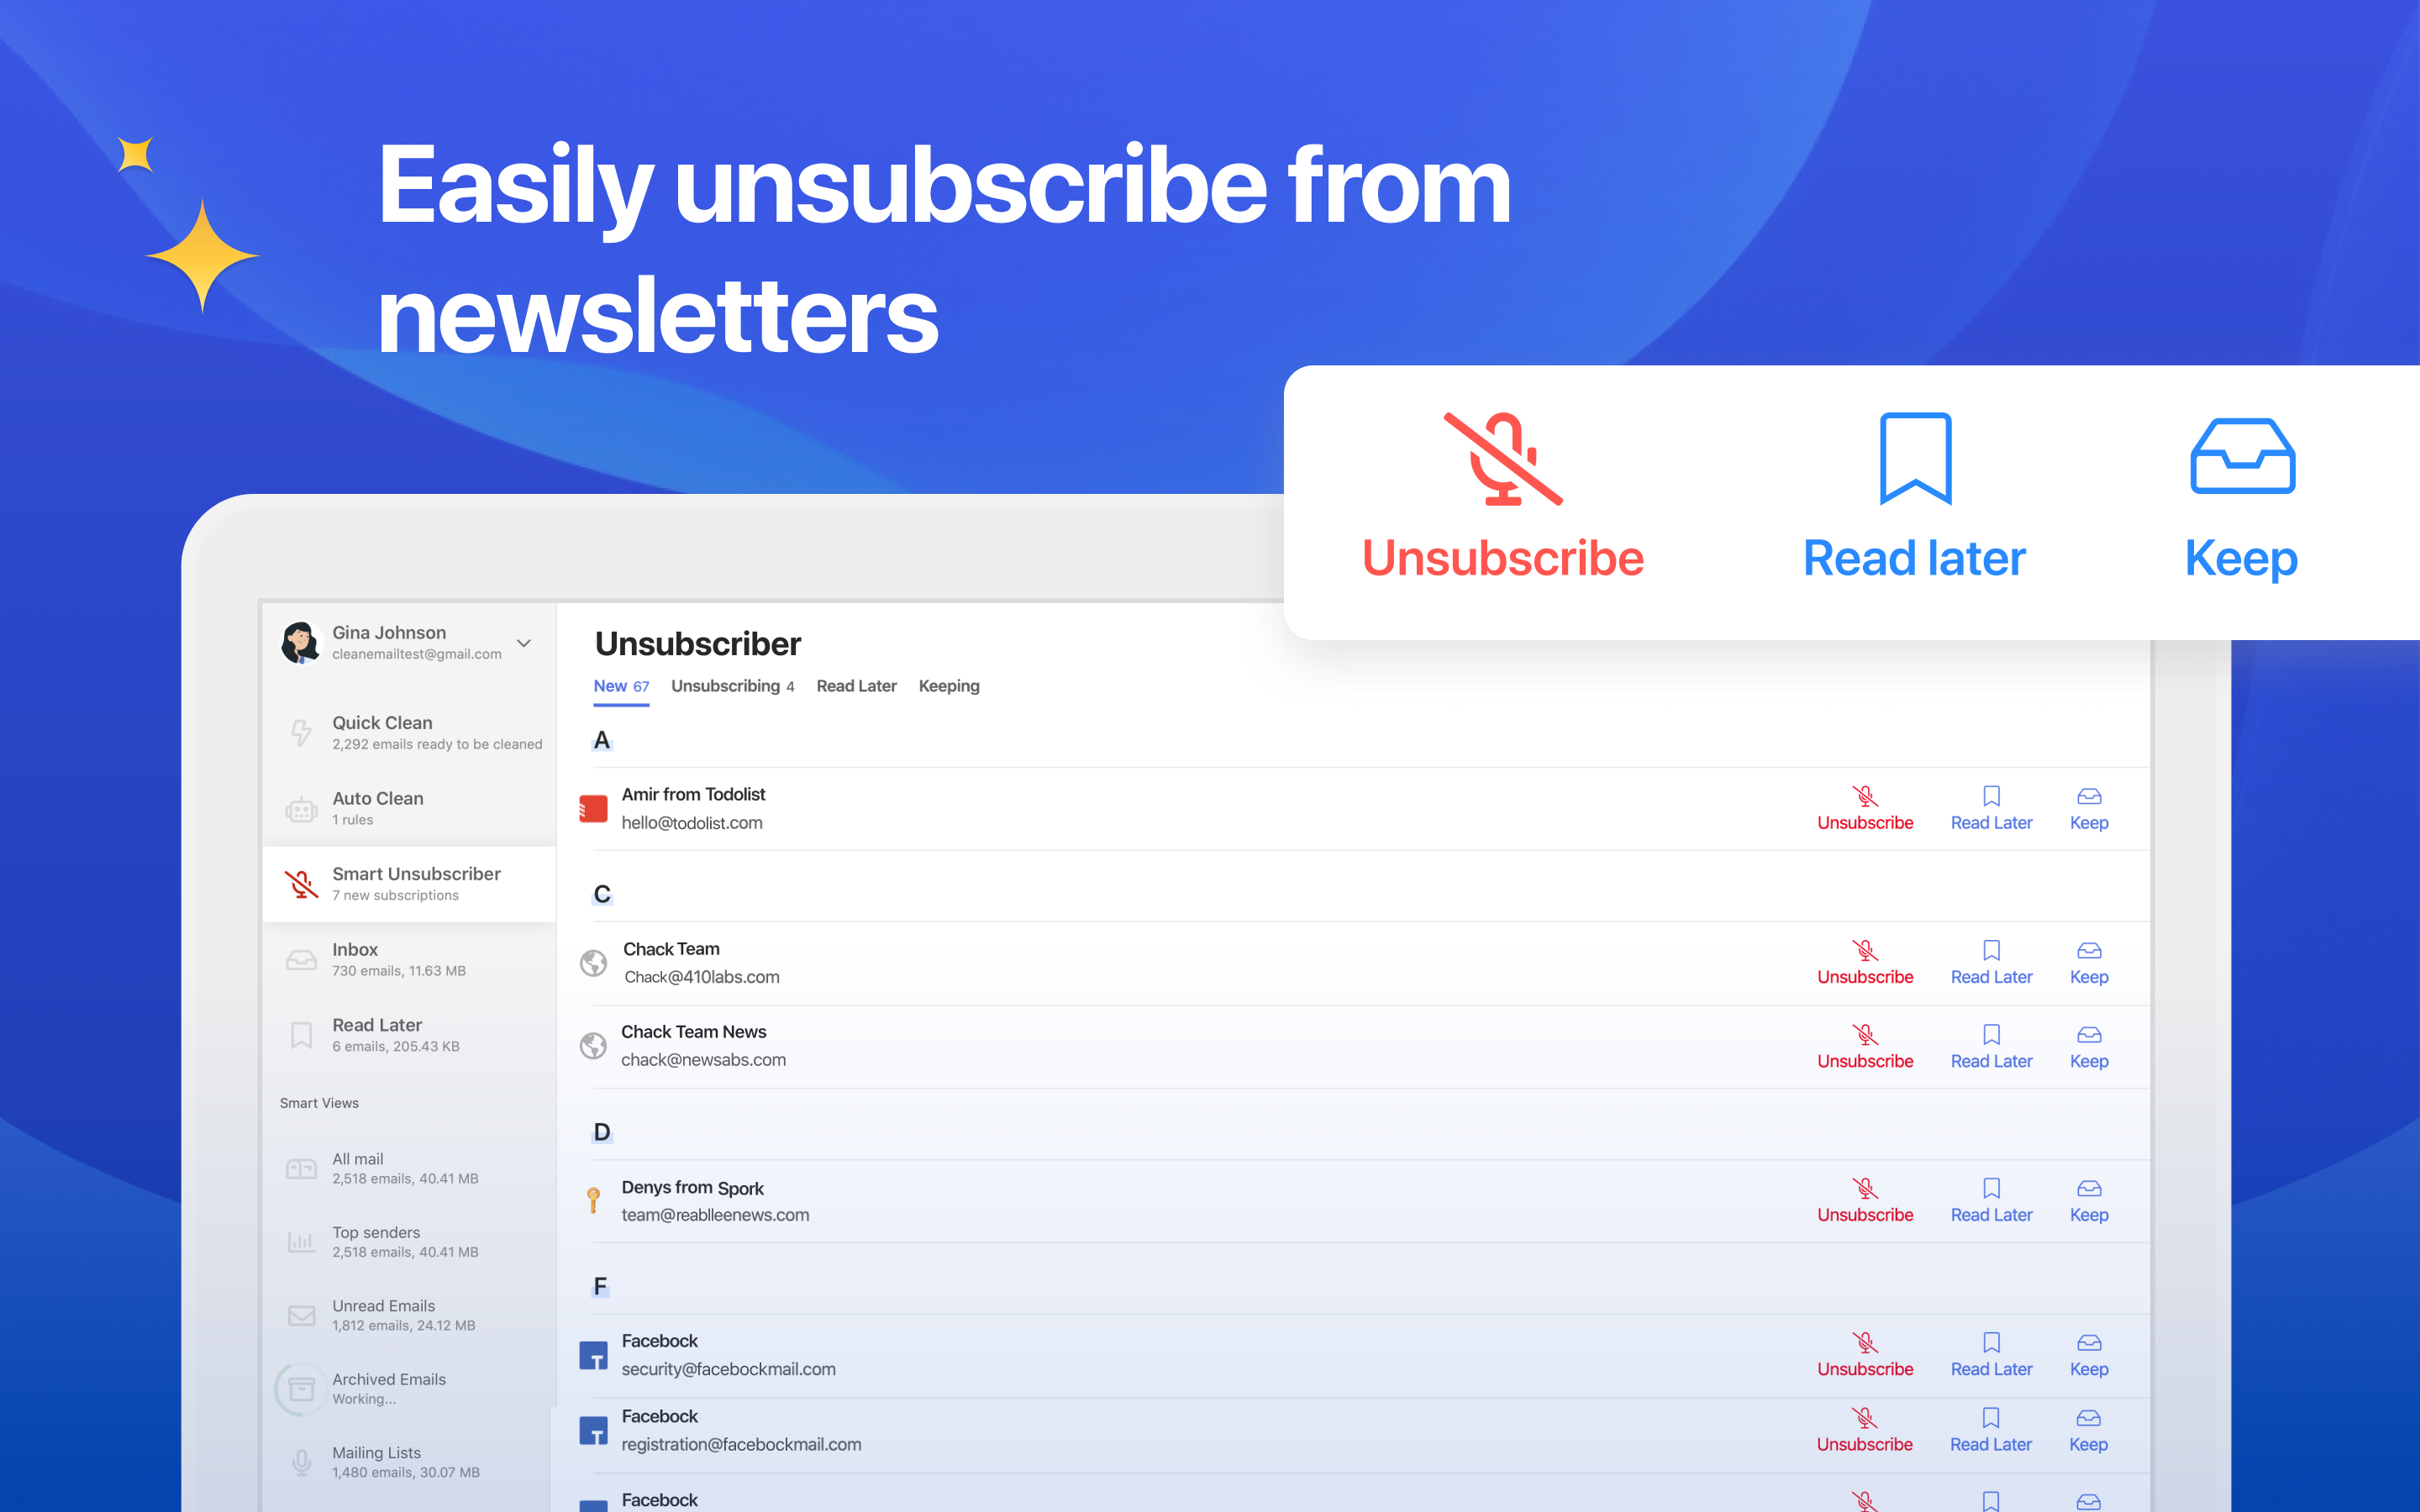 Easily unsubscribe from newsletters